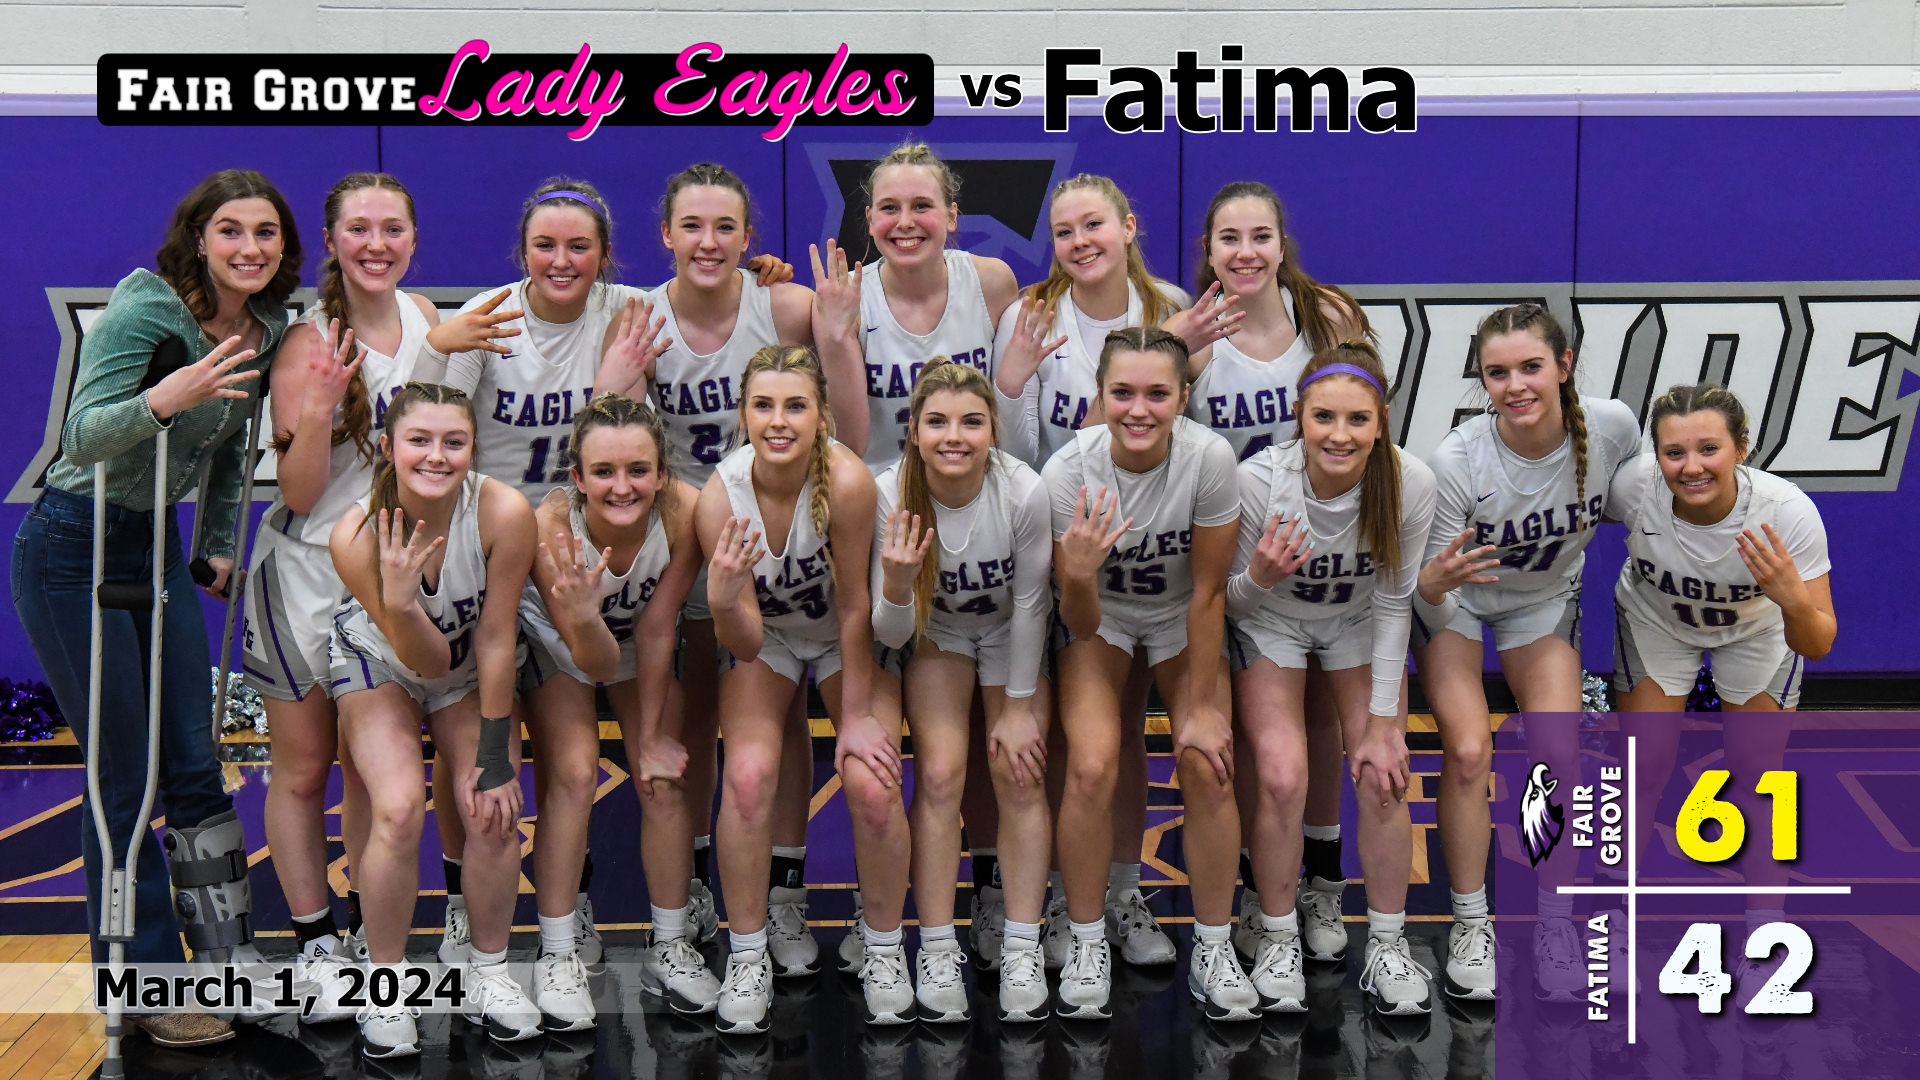 Fair Grove Lady Eagles Heading to the Final Four after Defeating Fatima 61-42